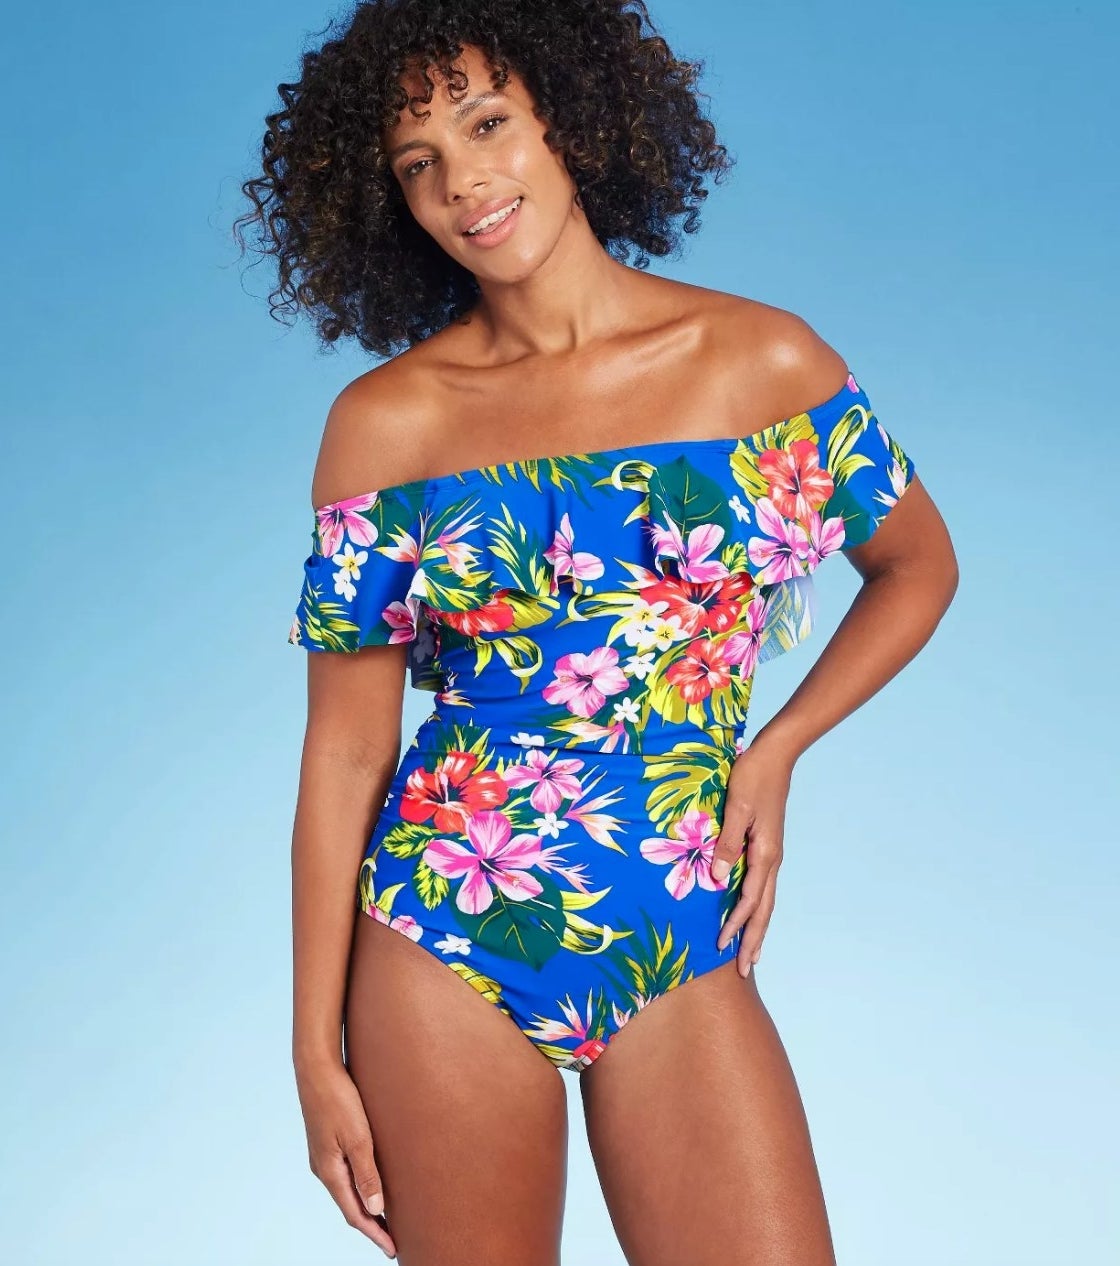 model wearing the blue floral bathing suit